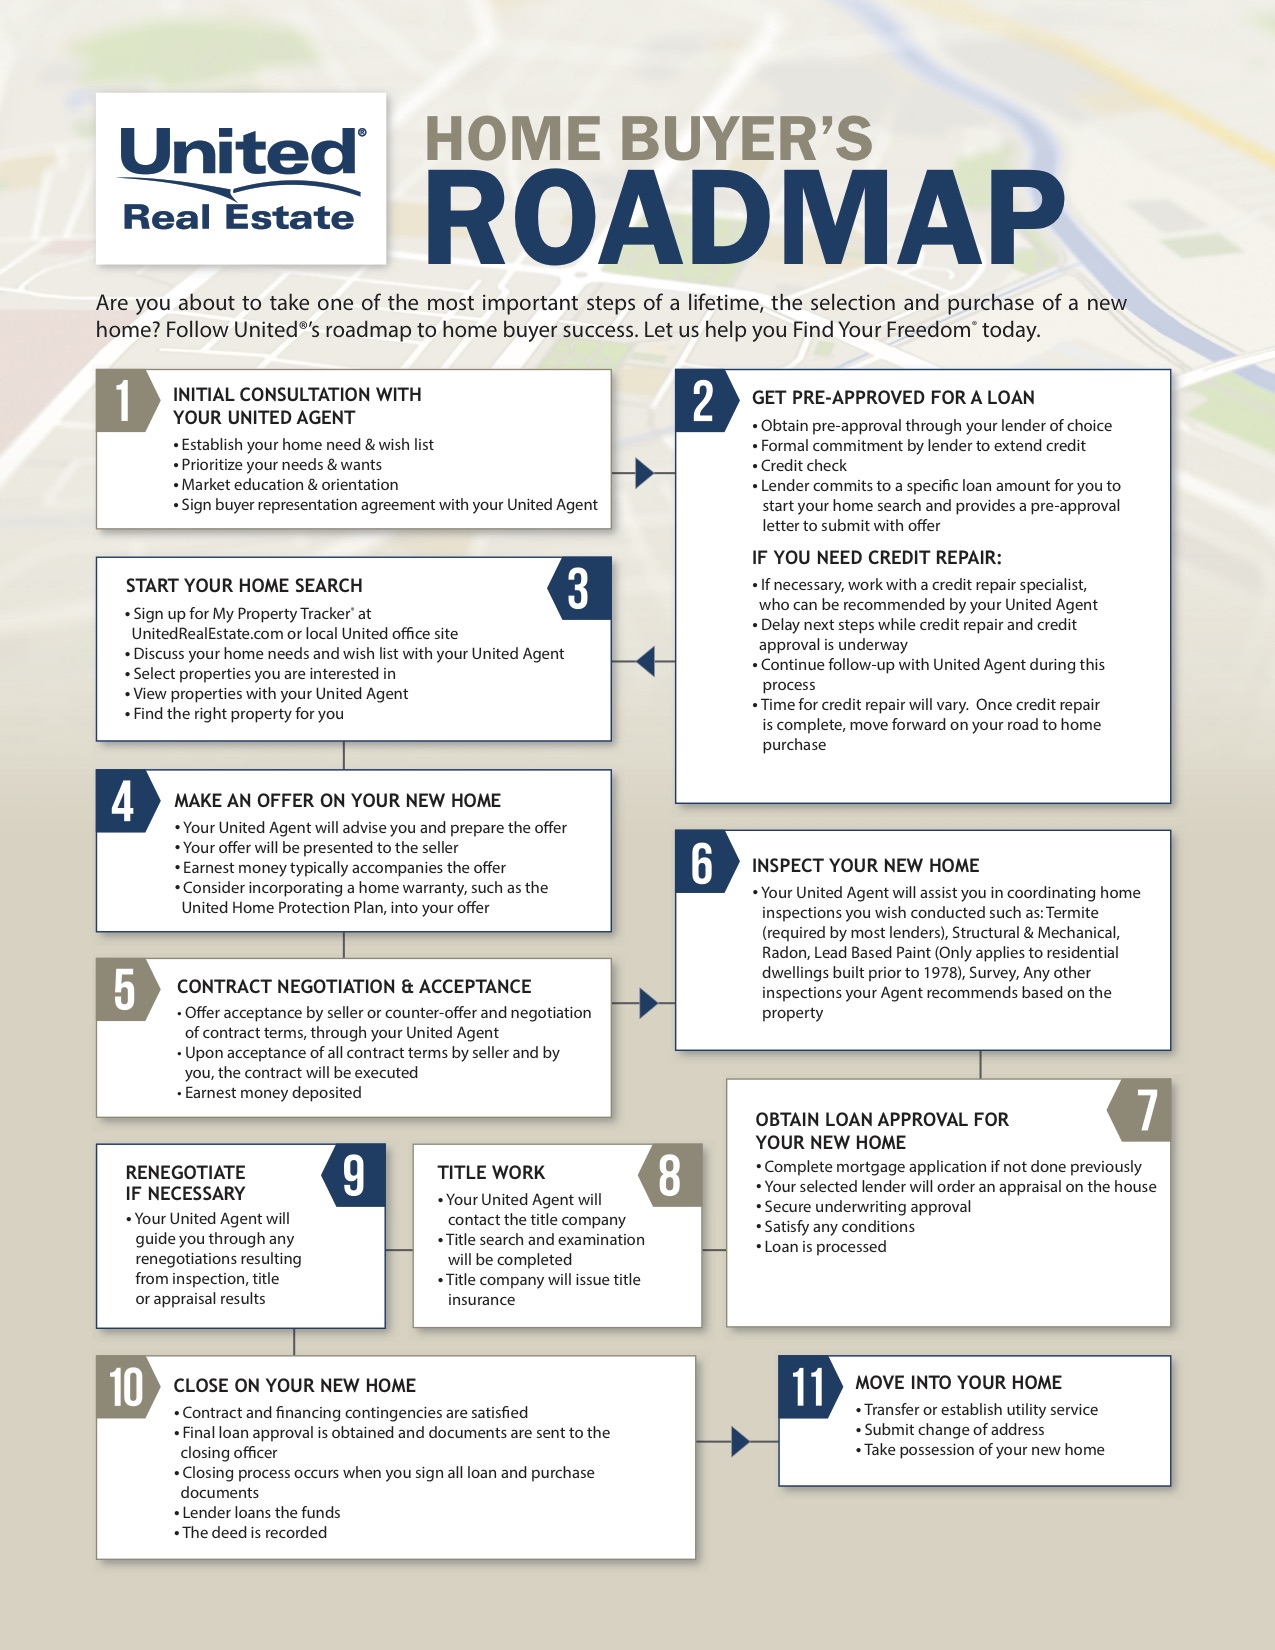 Home Buying Process road map